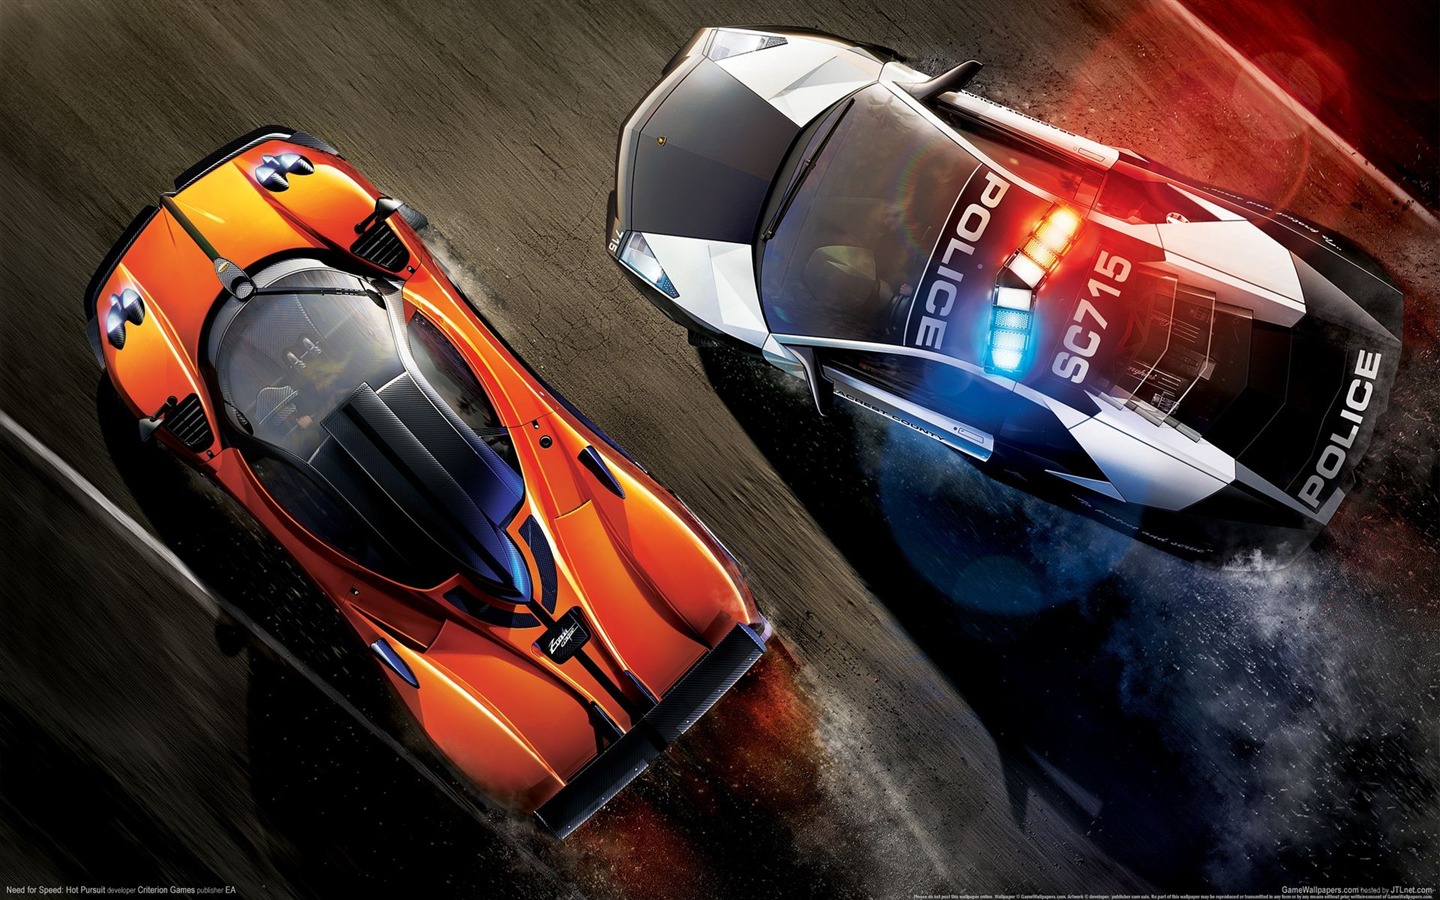 Need for Speed: Hot Pursuit #1 - 1440x900